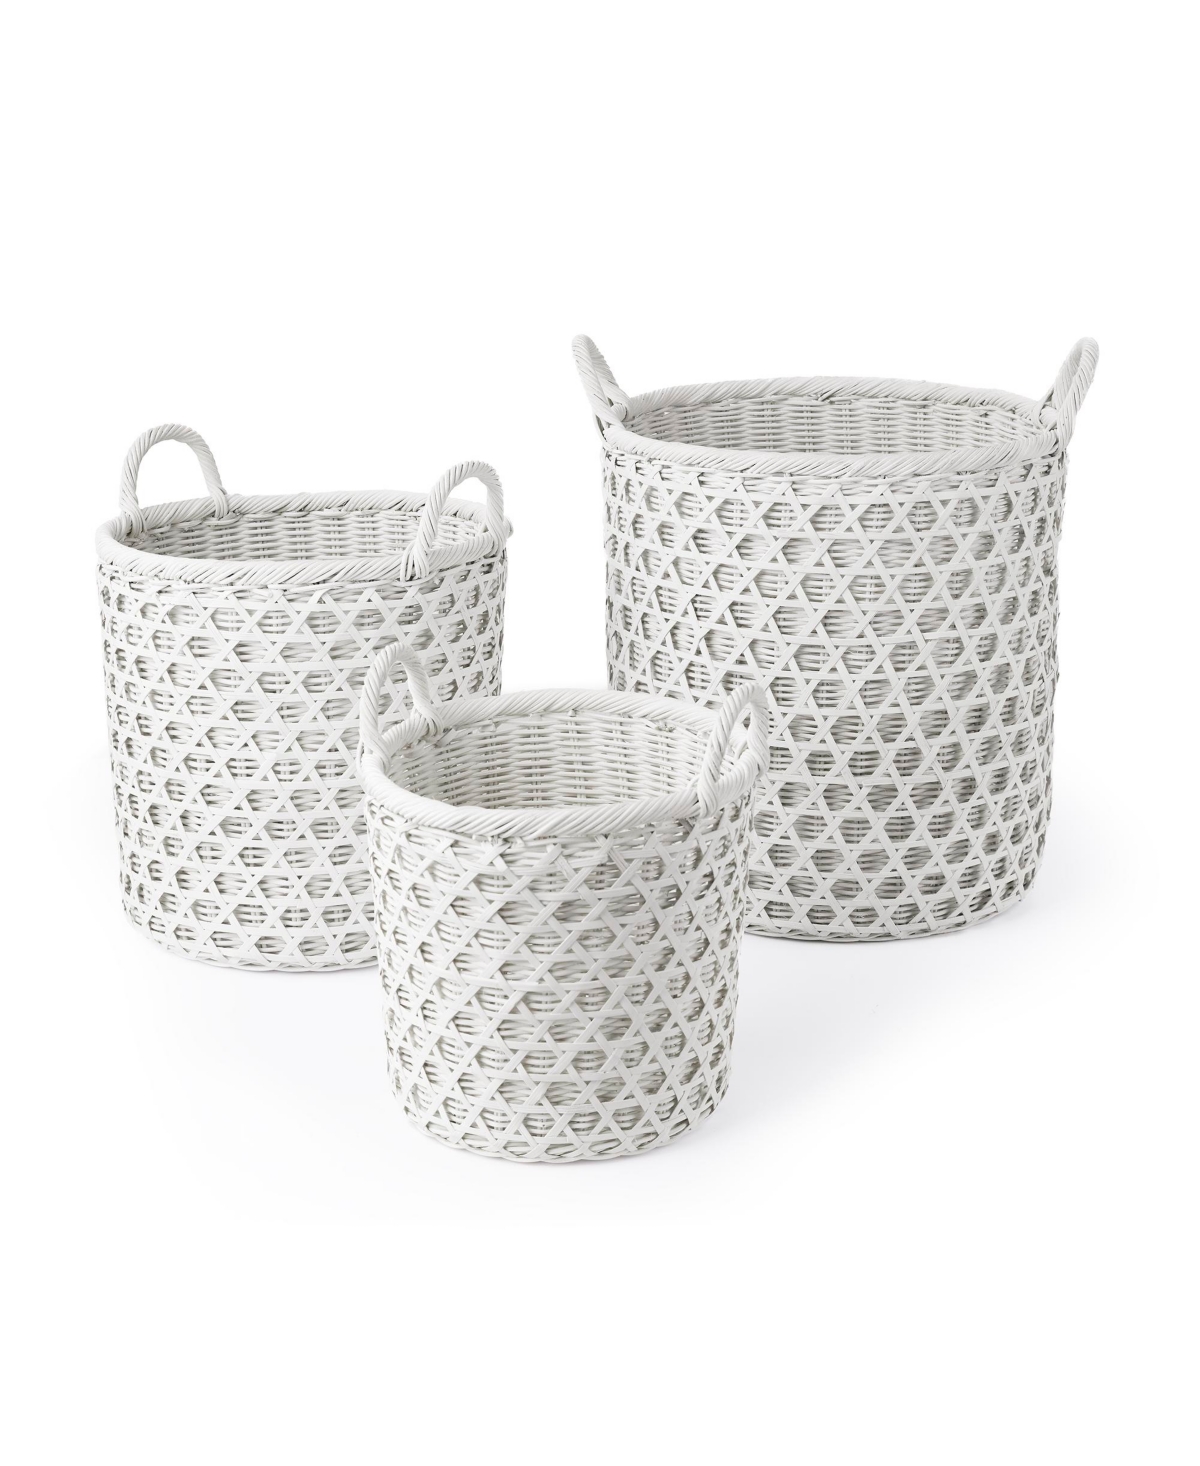 3 Piece Round Rattan and Bamboo Caning Basket Set with Ear Handles - White